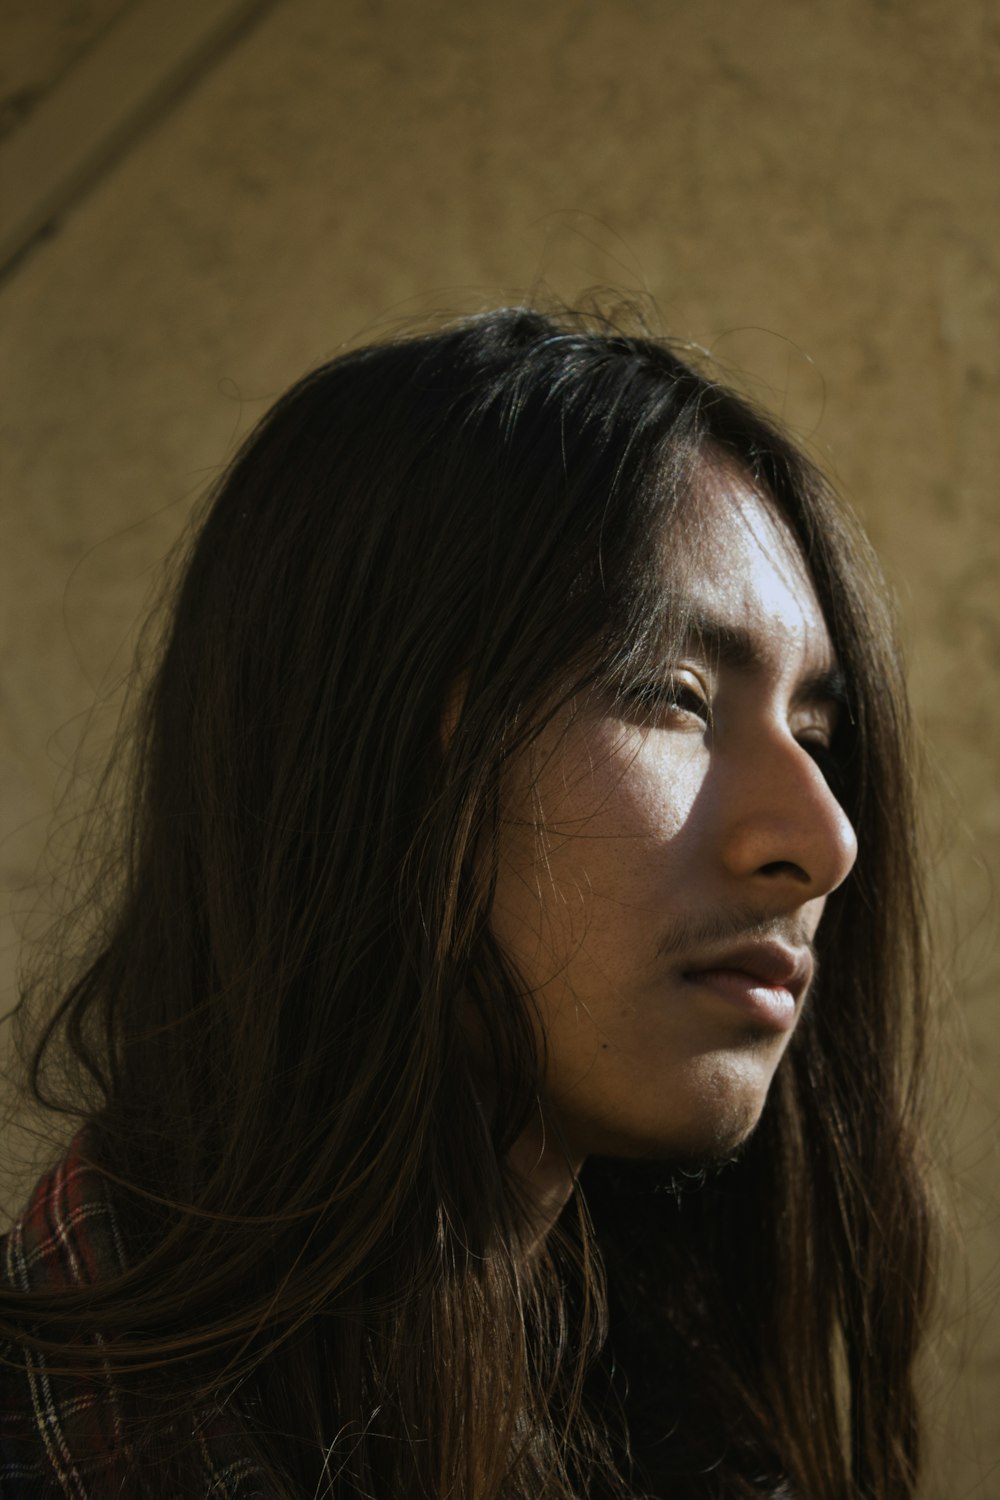 long-haired man standing near brown concrete wall